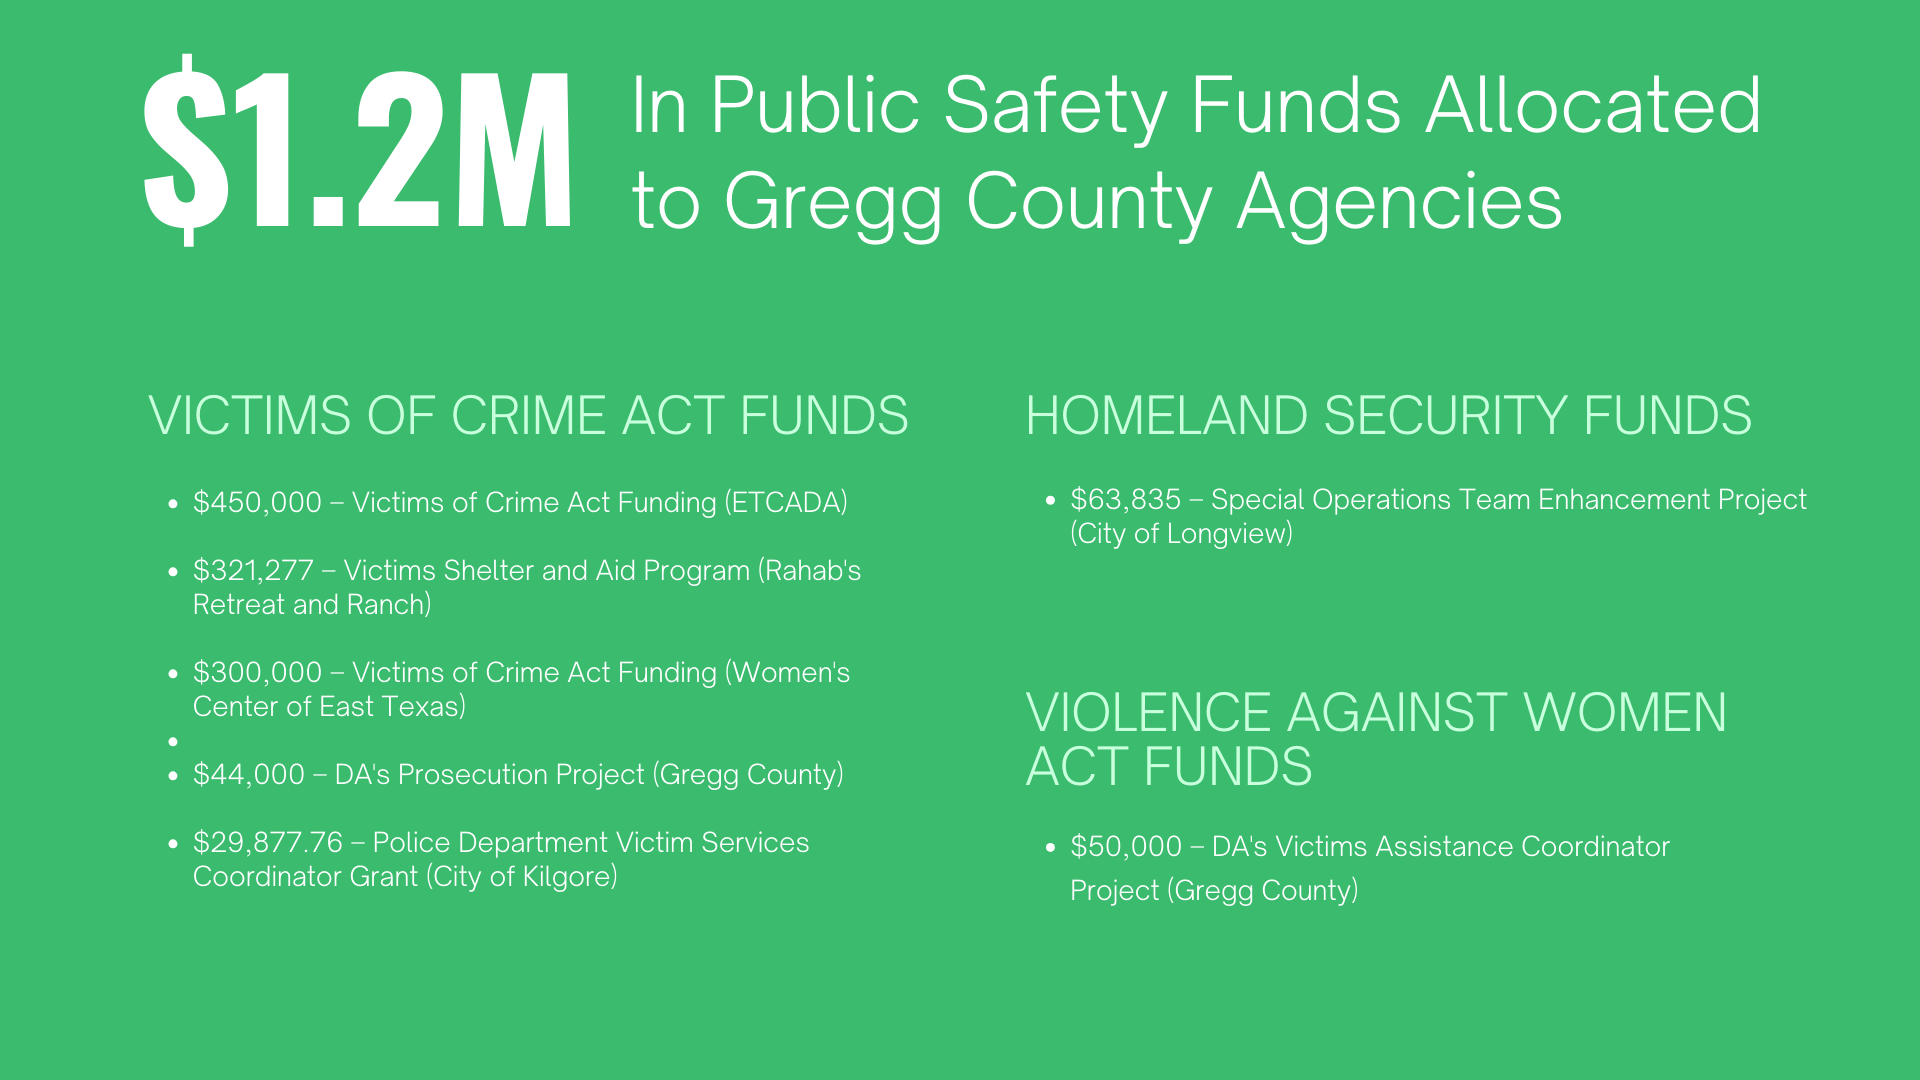 A green background with white text that says `` $ 1.2m in public safety funds allocated to cregg county agencies ''